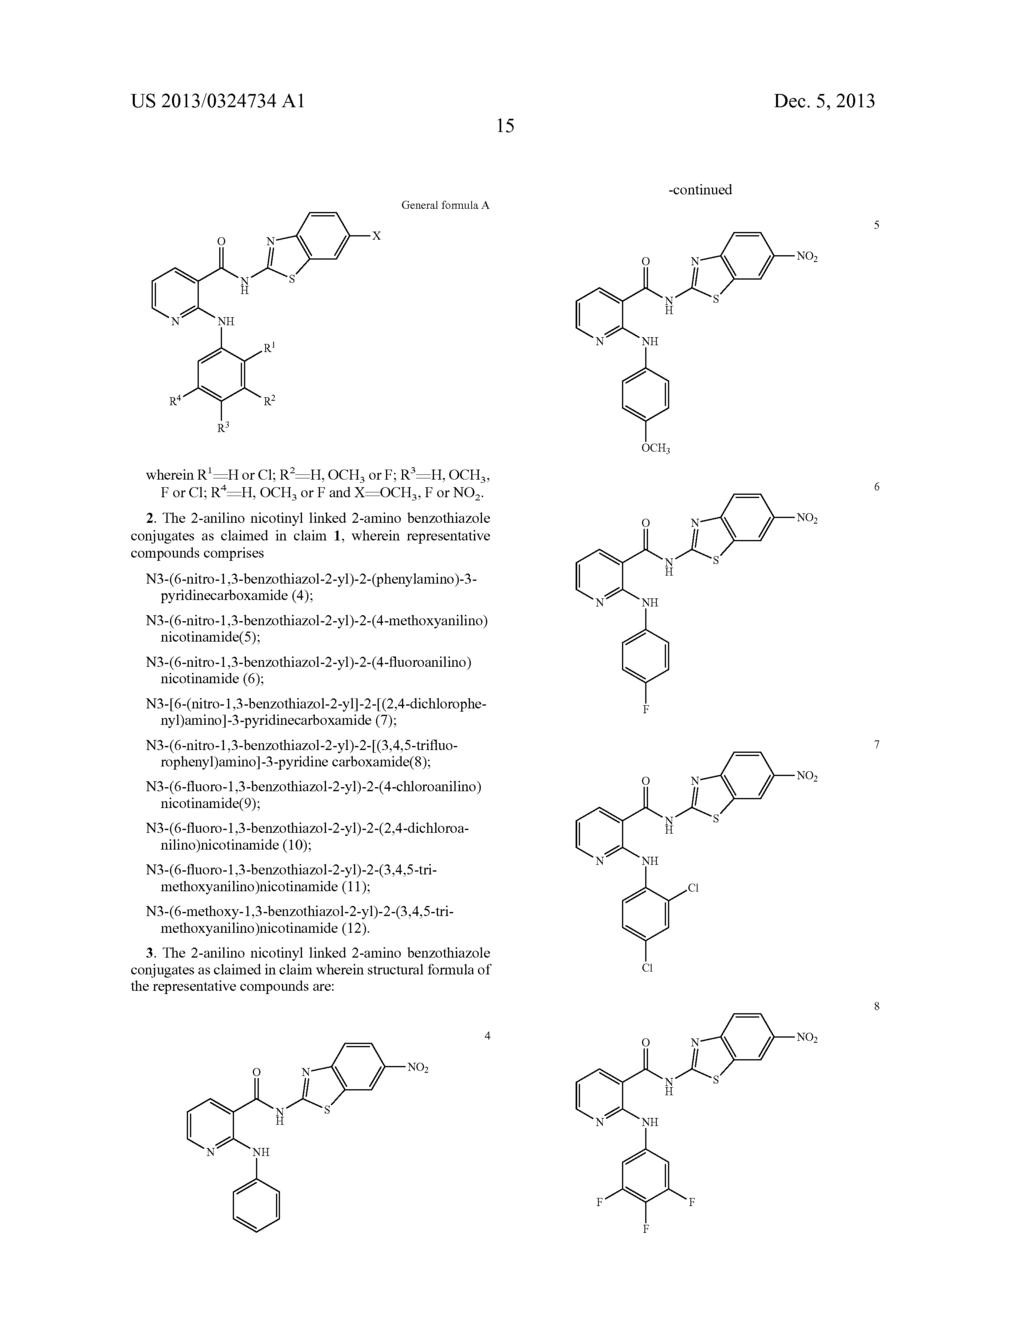 2-ANILINO NICOTINYL LINKED 2-AMINO BENZOTHIAZOLE CONJUGATES AND PROCESS     FOR THE PREPARATION THEREOF - diagram, schematic, and image 30